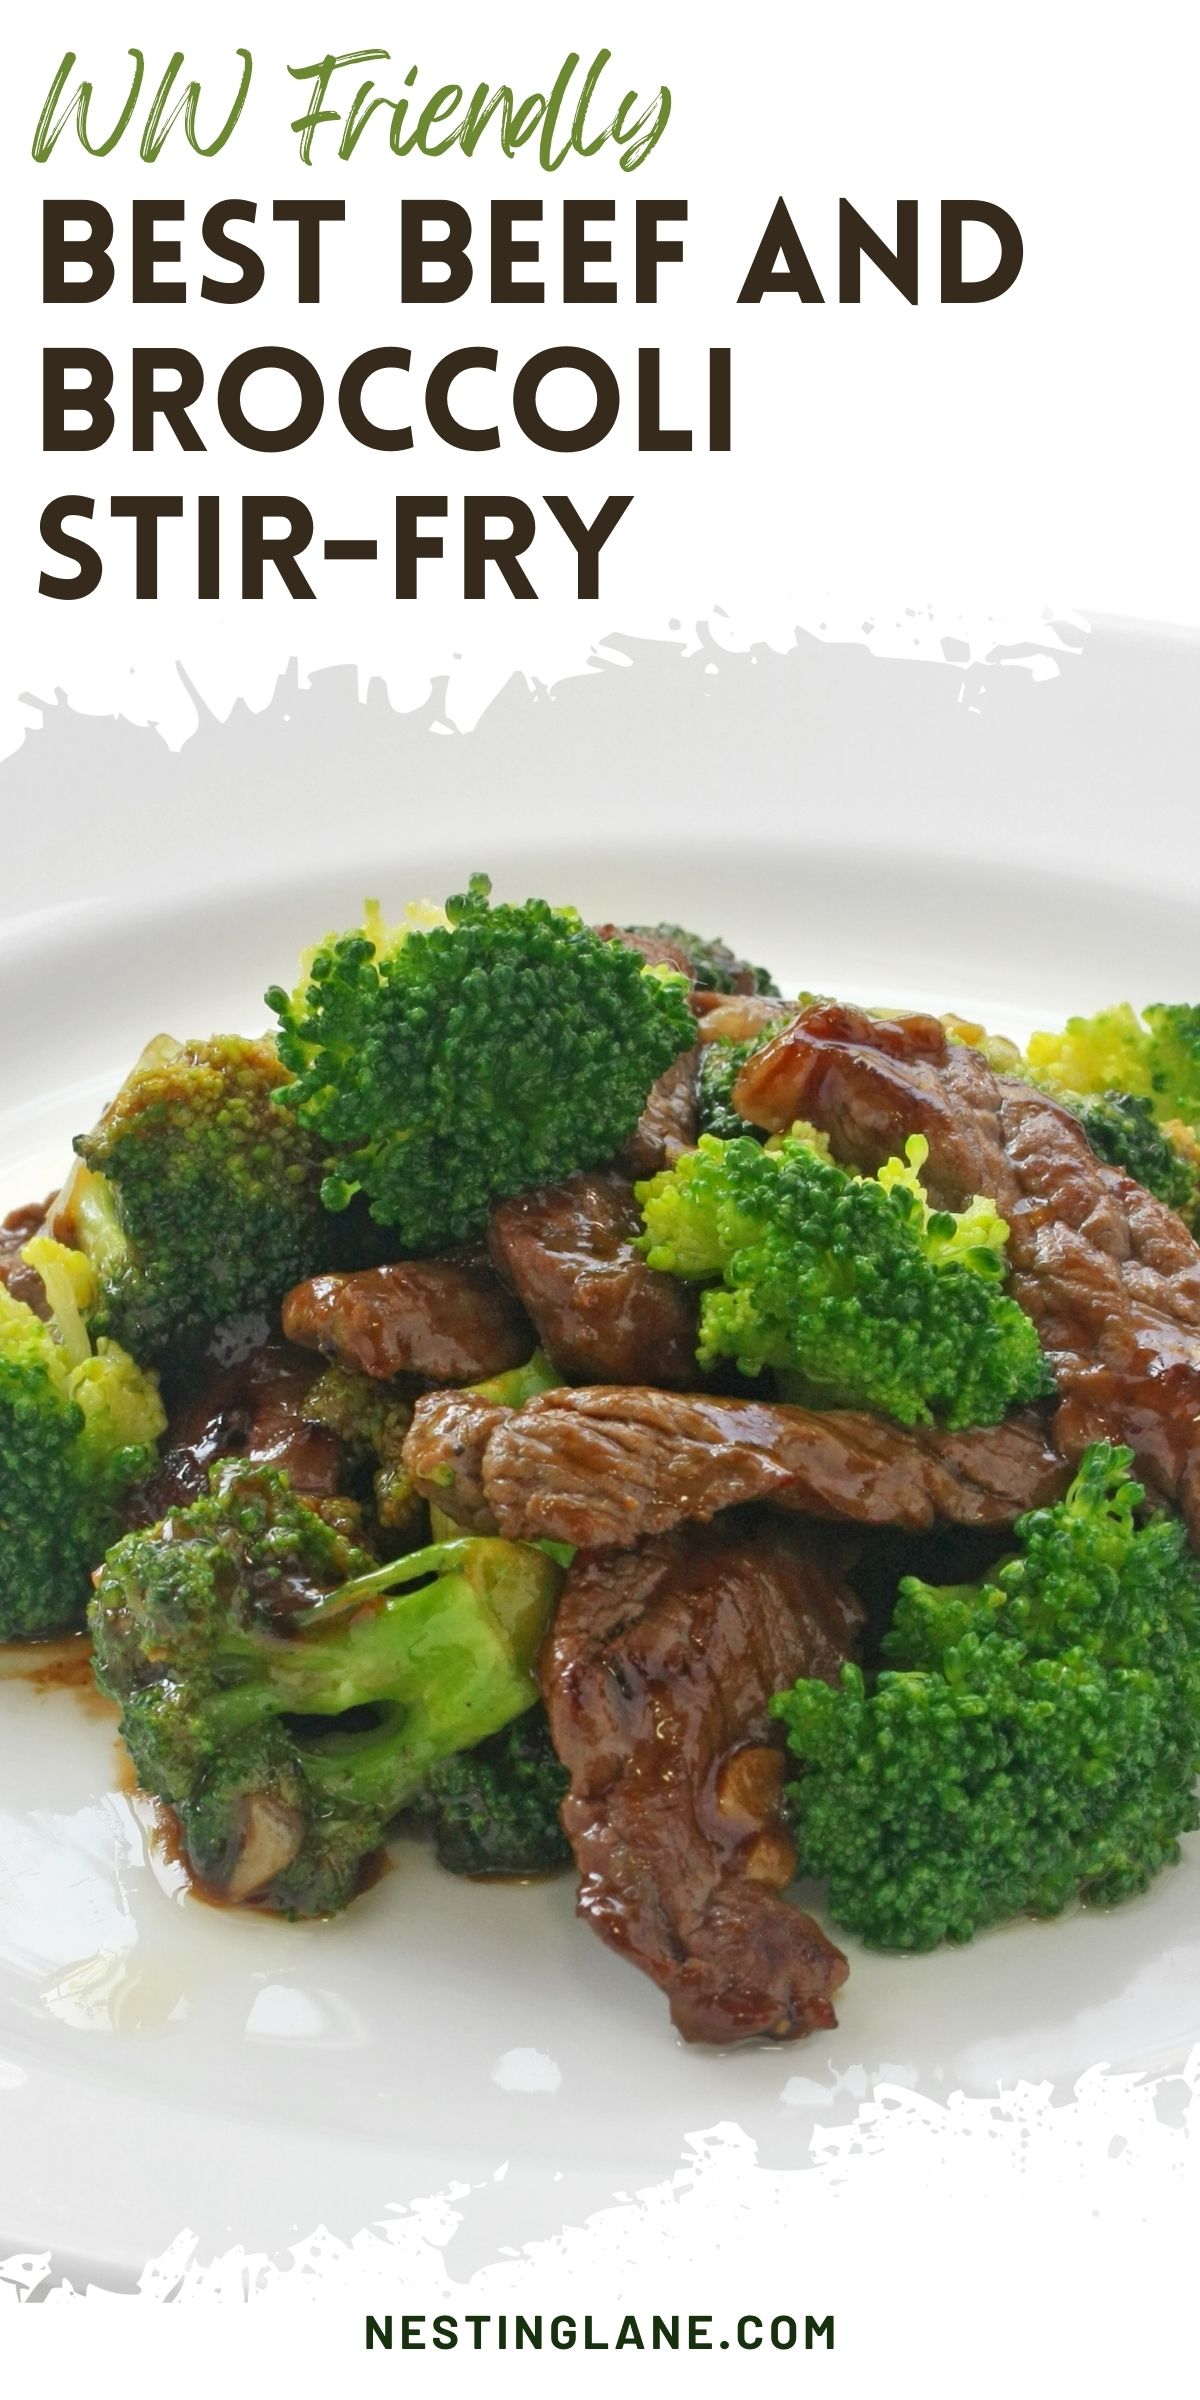 Best Beef and Broccoli Stir-Fry Graphic.